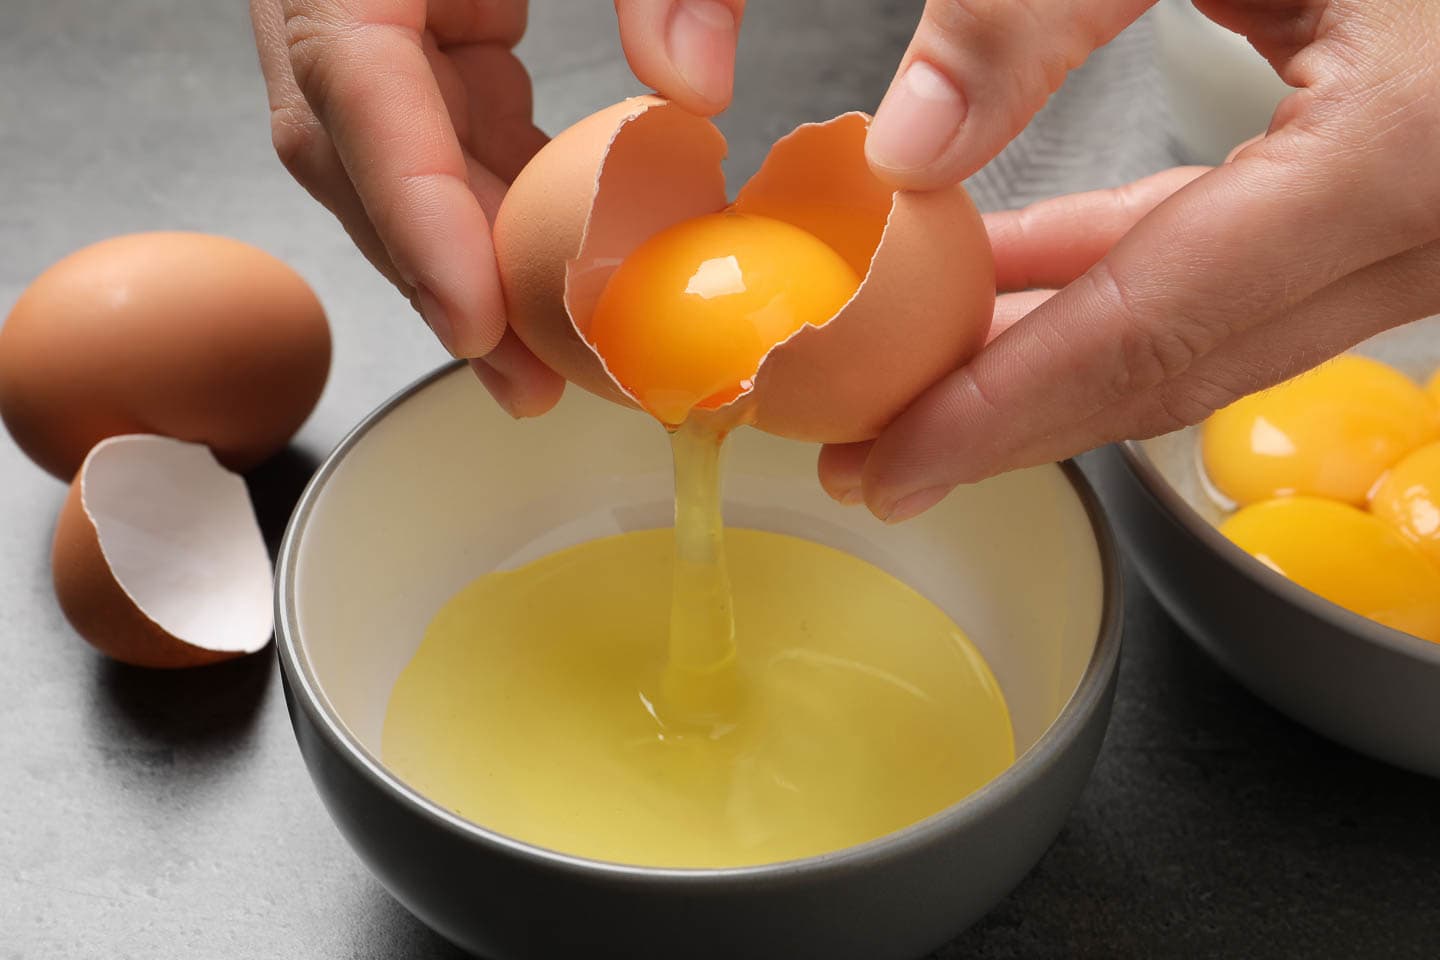 Egg being separated between two egg shells